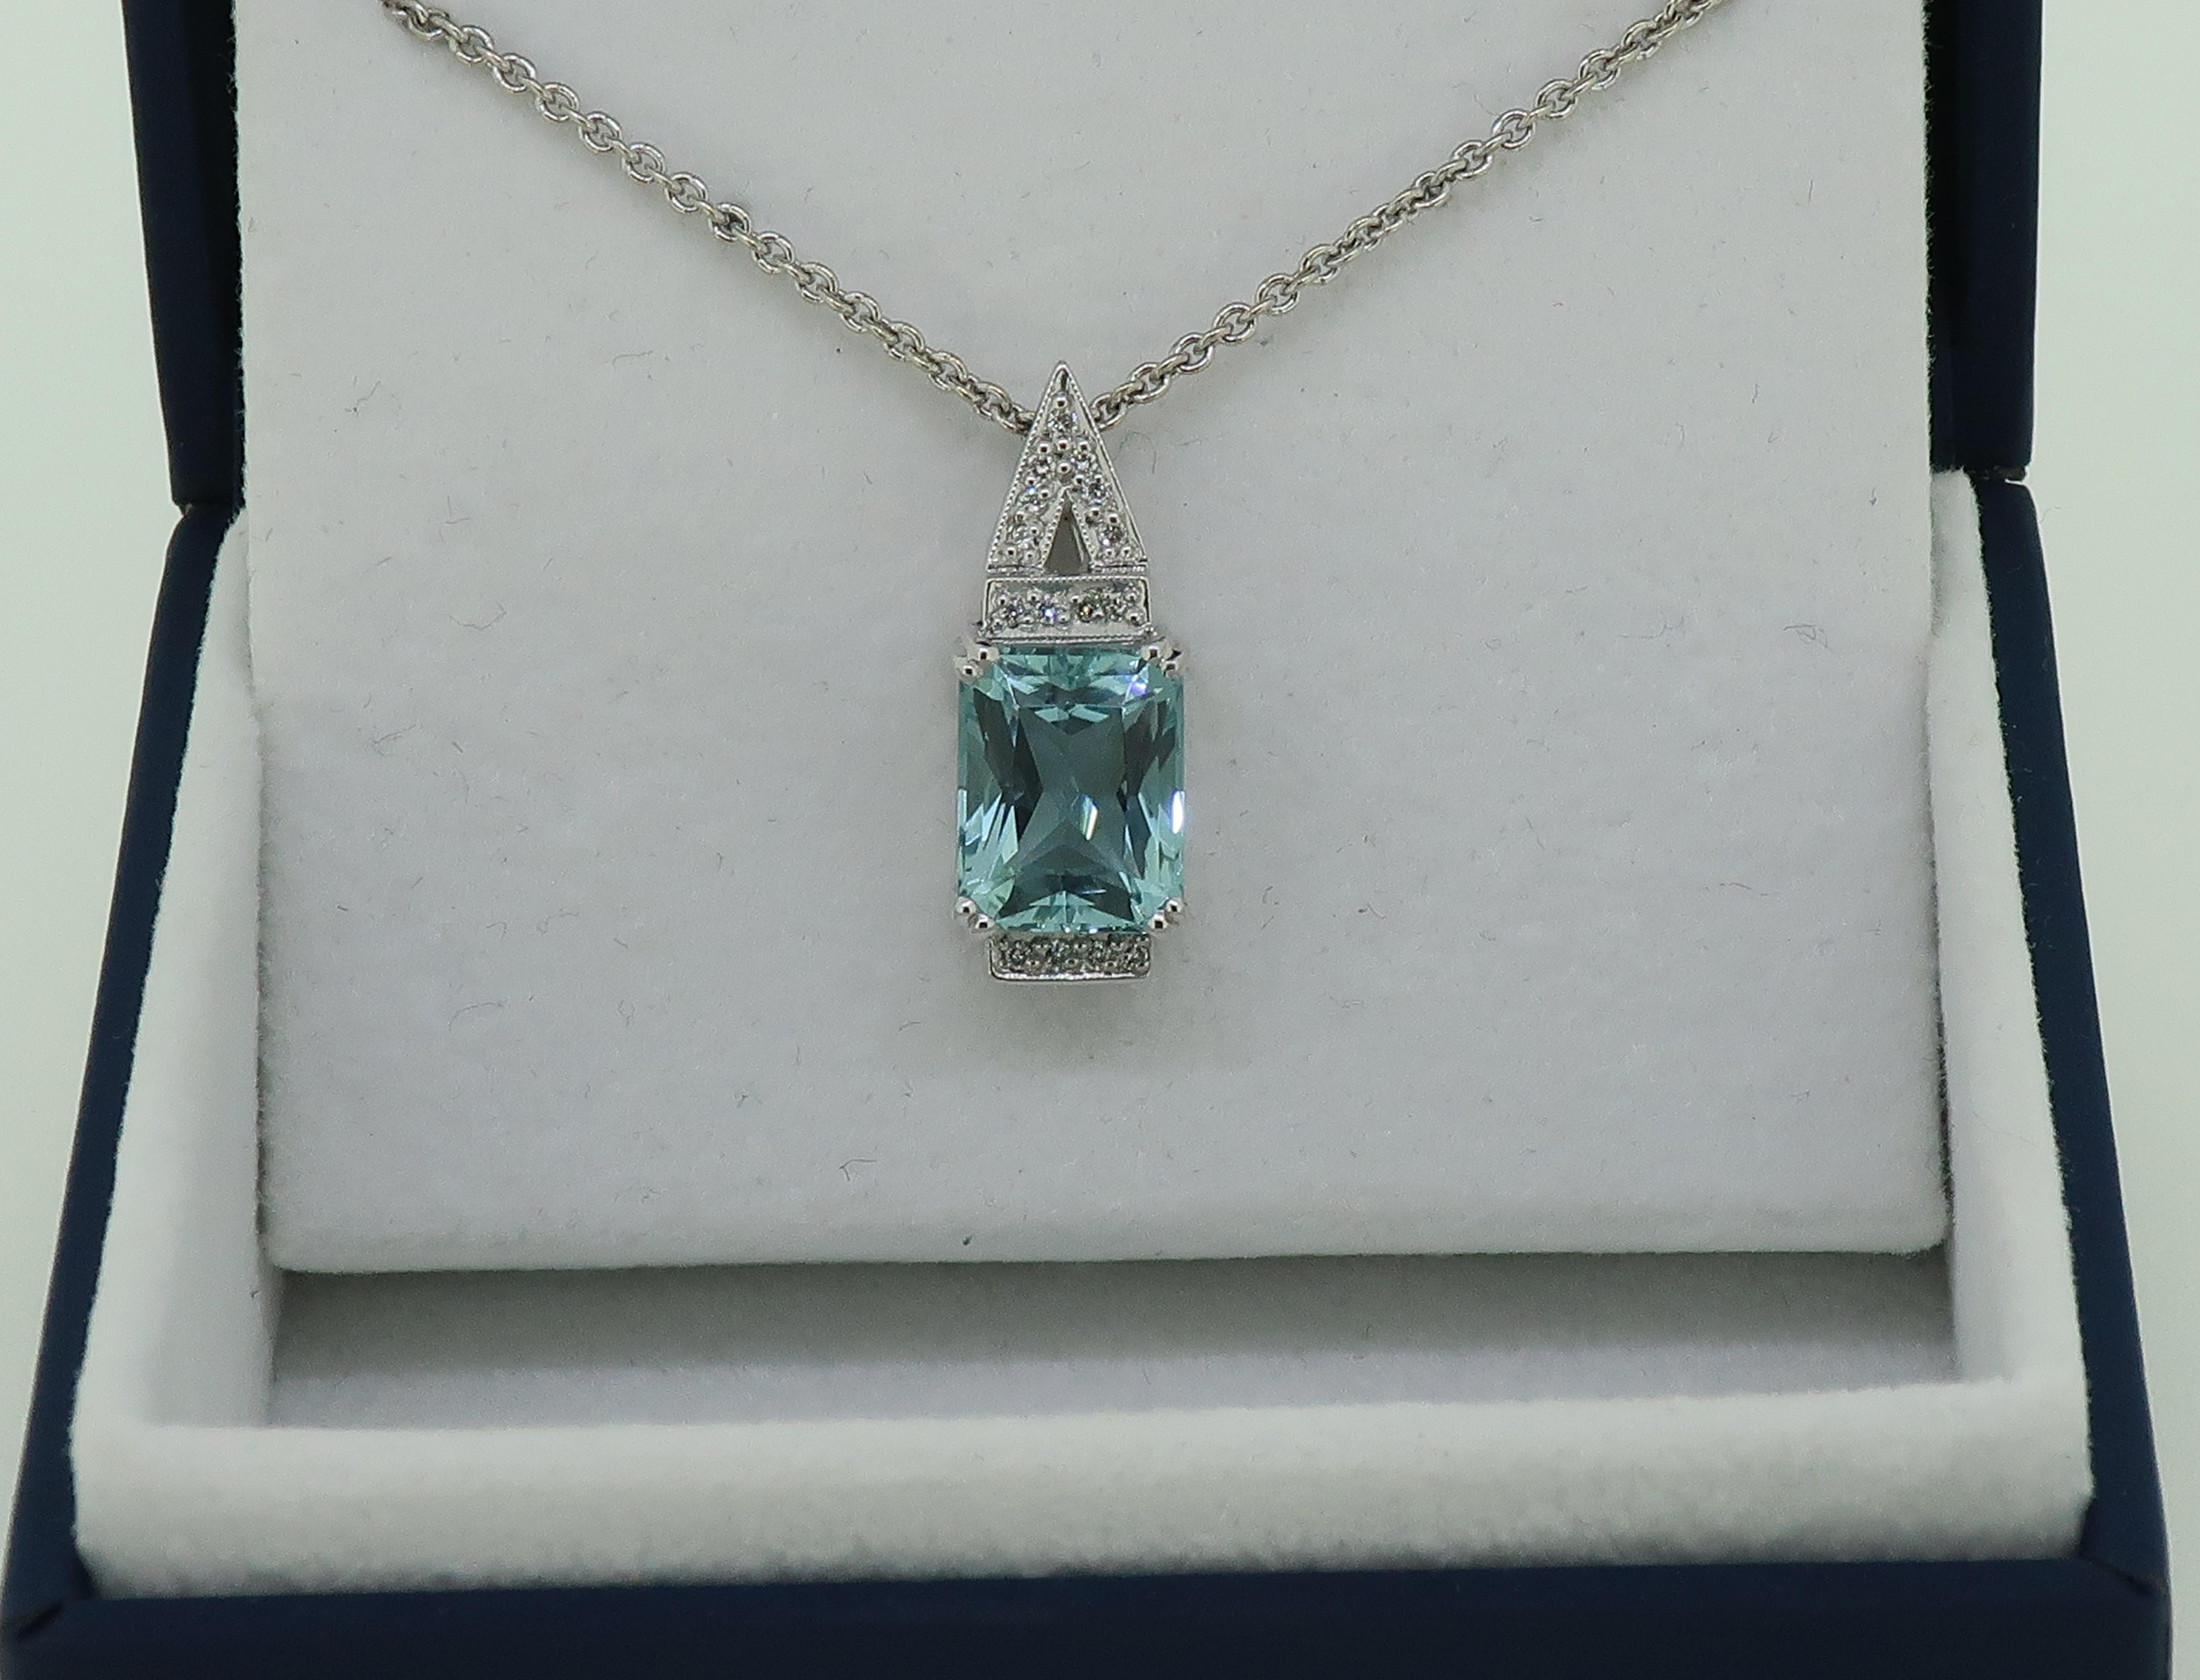 Aquamarine and Diamond Pendant 18 Karat White Gold

Vibrant aquamarine and diamond pendant. Bright blue radiant cut aquamarine measuring 10mm x 7.8mm, set in four double claws. The aquamarine is set off with a row of small round brilliant cut